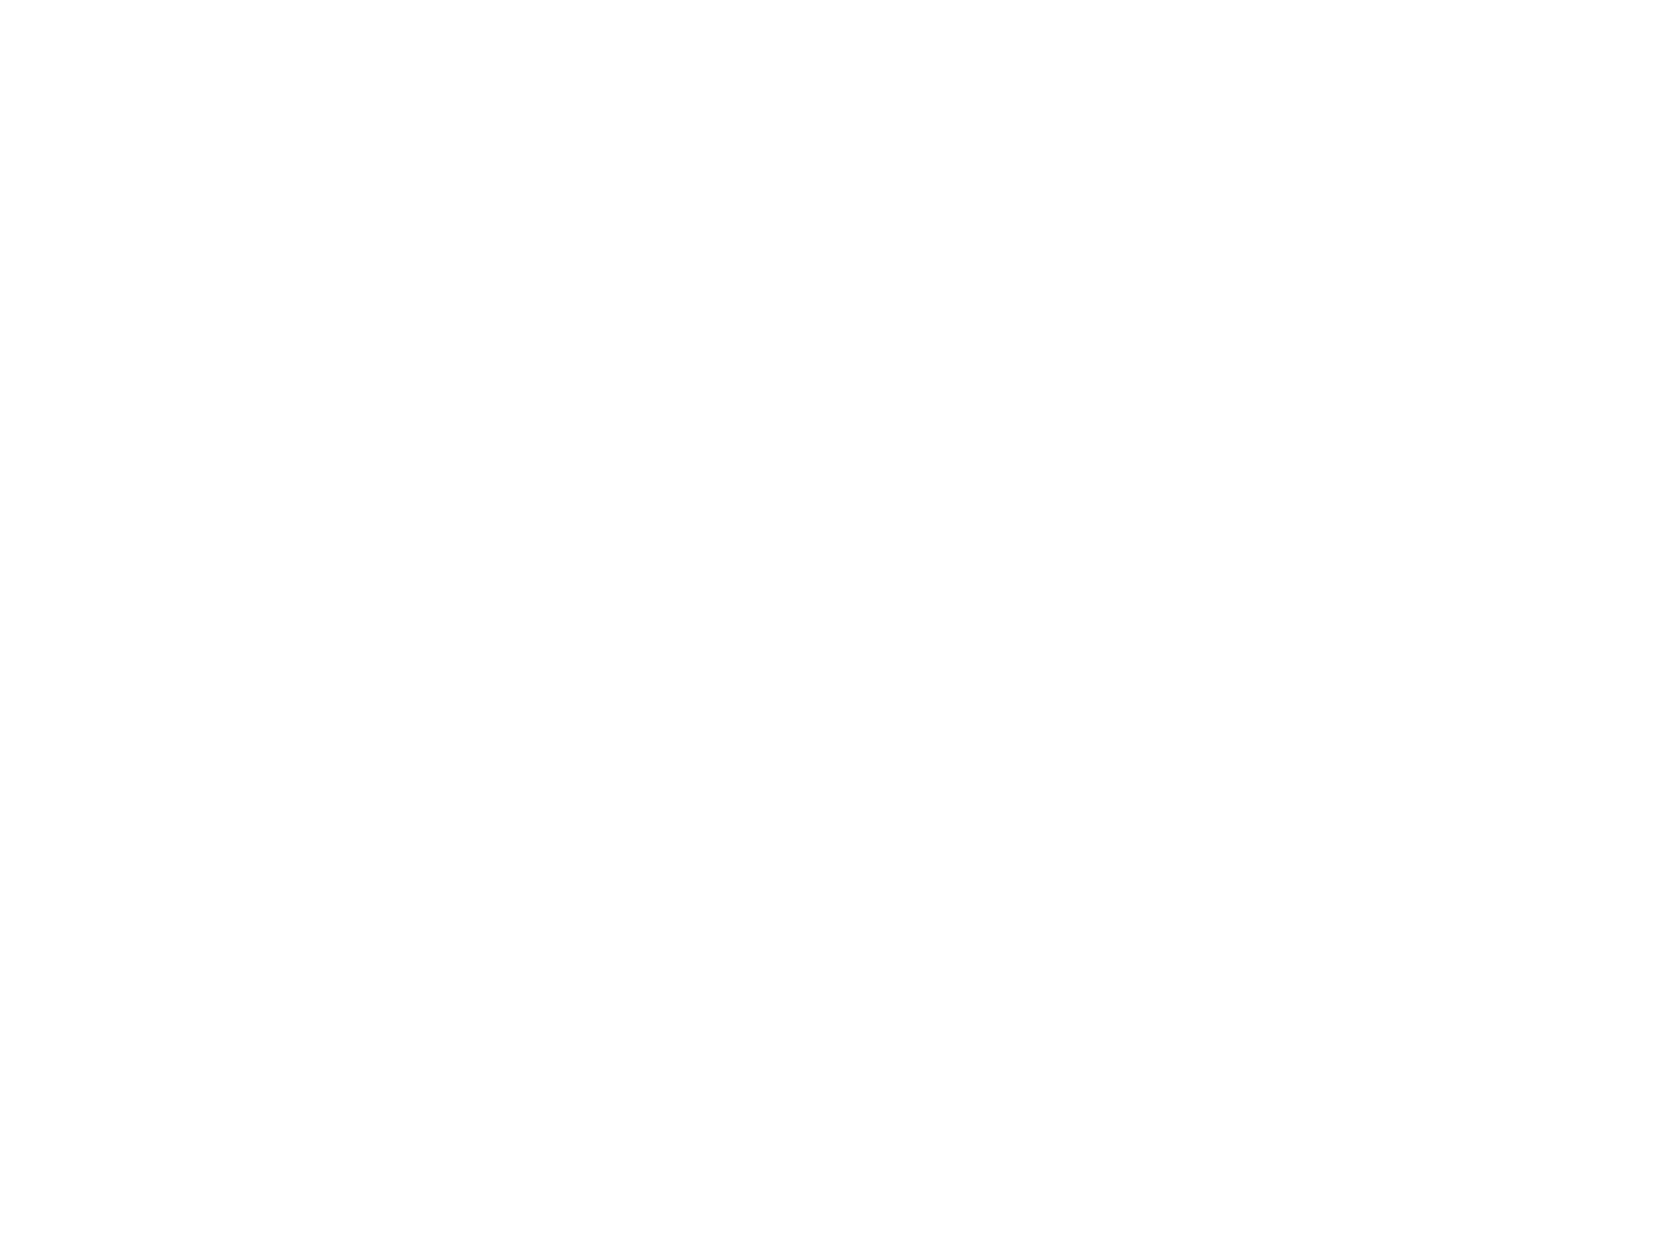 Xplor: Midwest Brand Amplification Agency